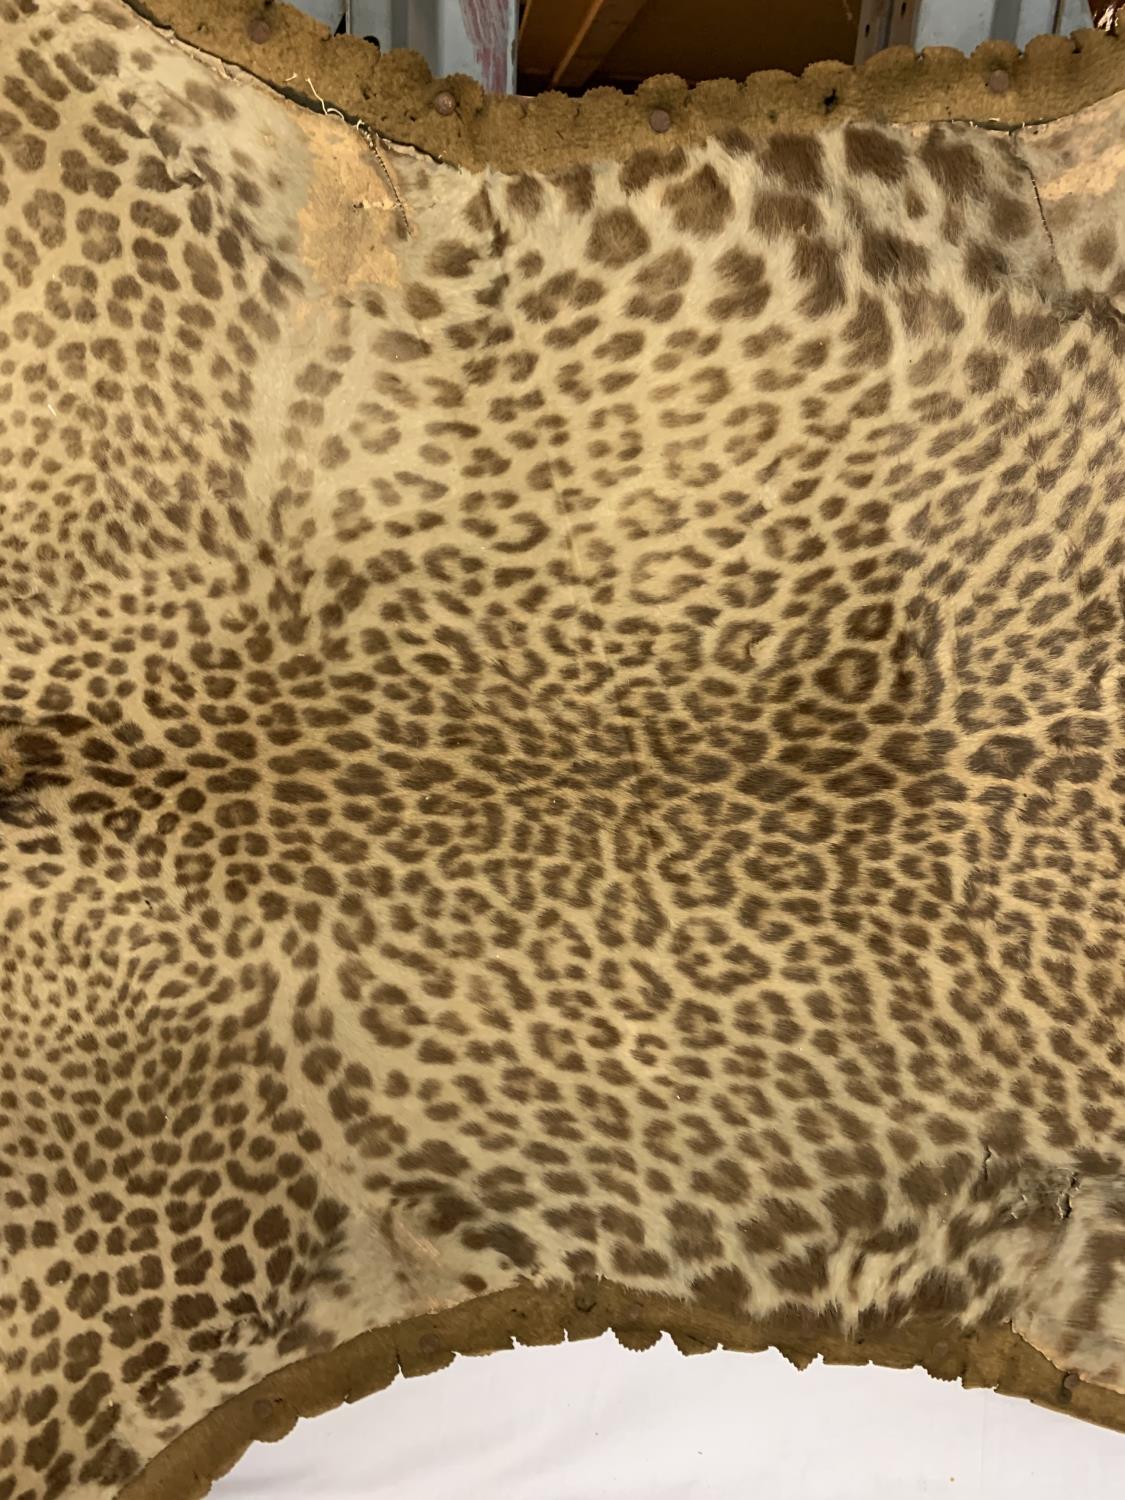 A VICTORIAN LEOPARD SKIN ON A BOARD - Image 5 of 6